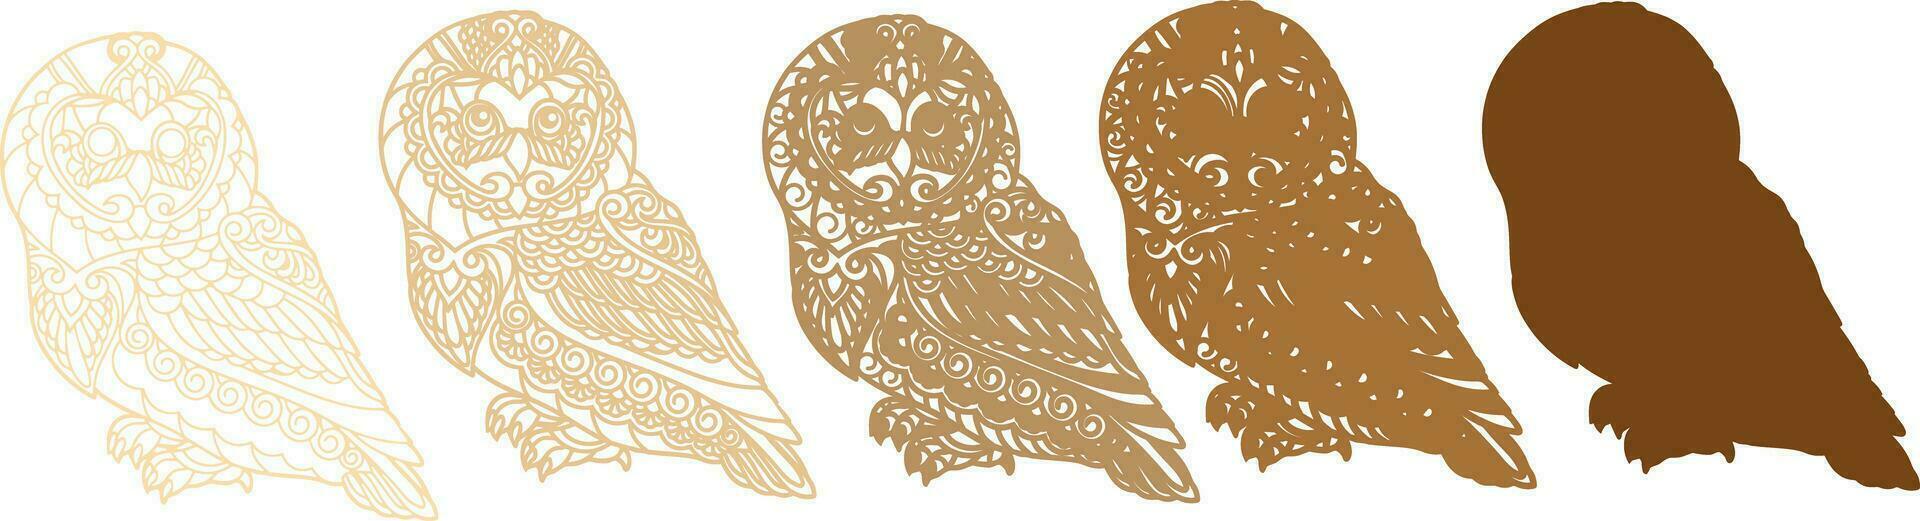 OWL Cut Files are specially prepared for the laser cut and paper cut machines. Intricate patterns of the wings and the owl's perched stance come together to form a stunning display of artistic finesse vector